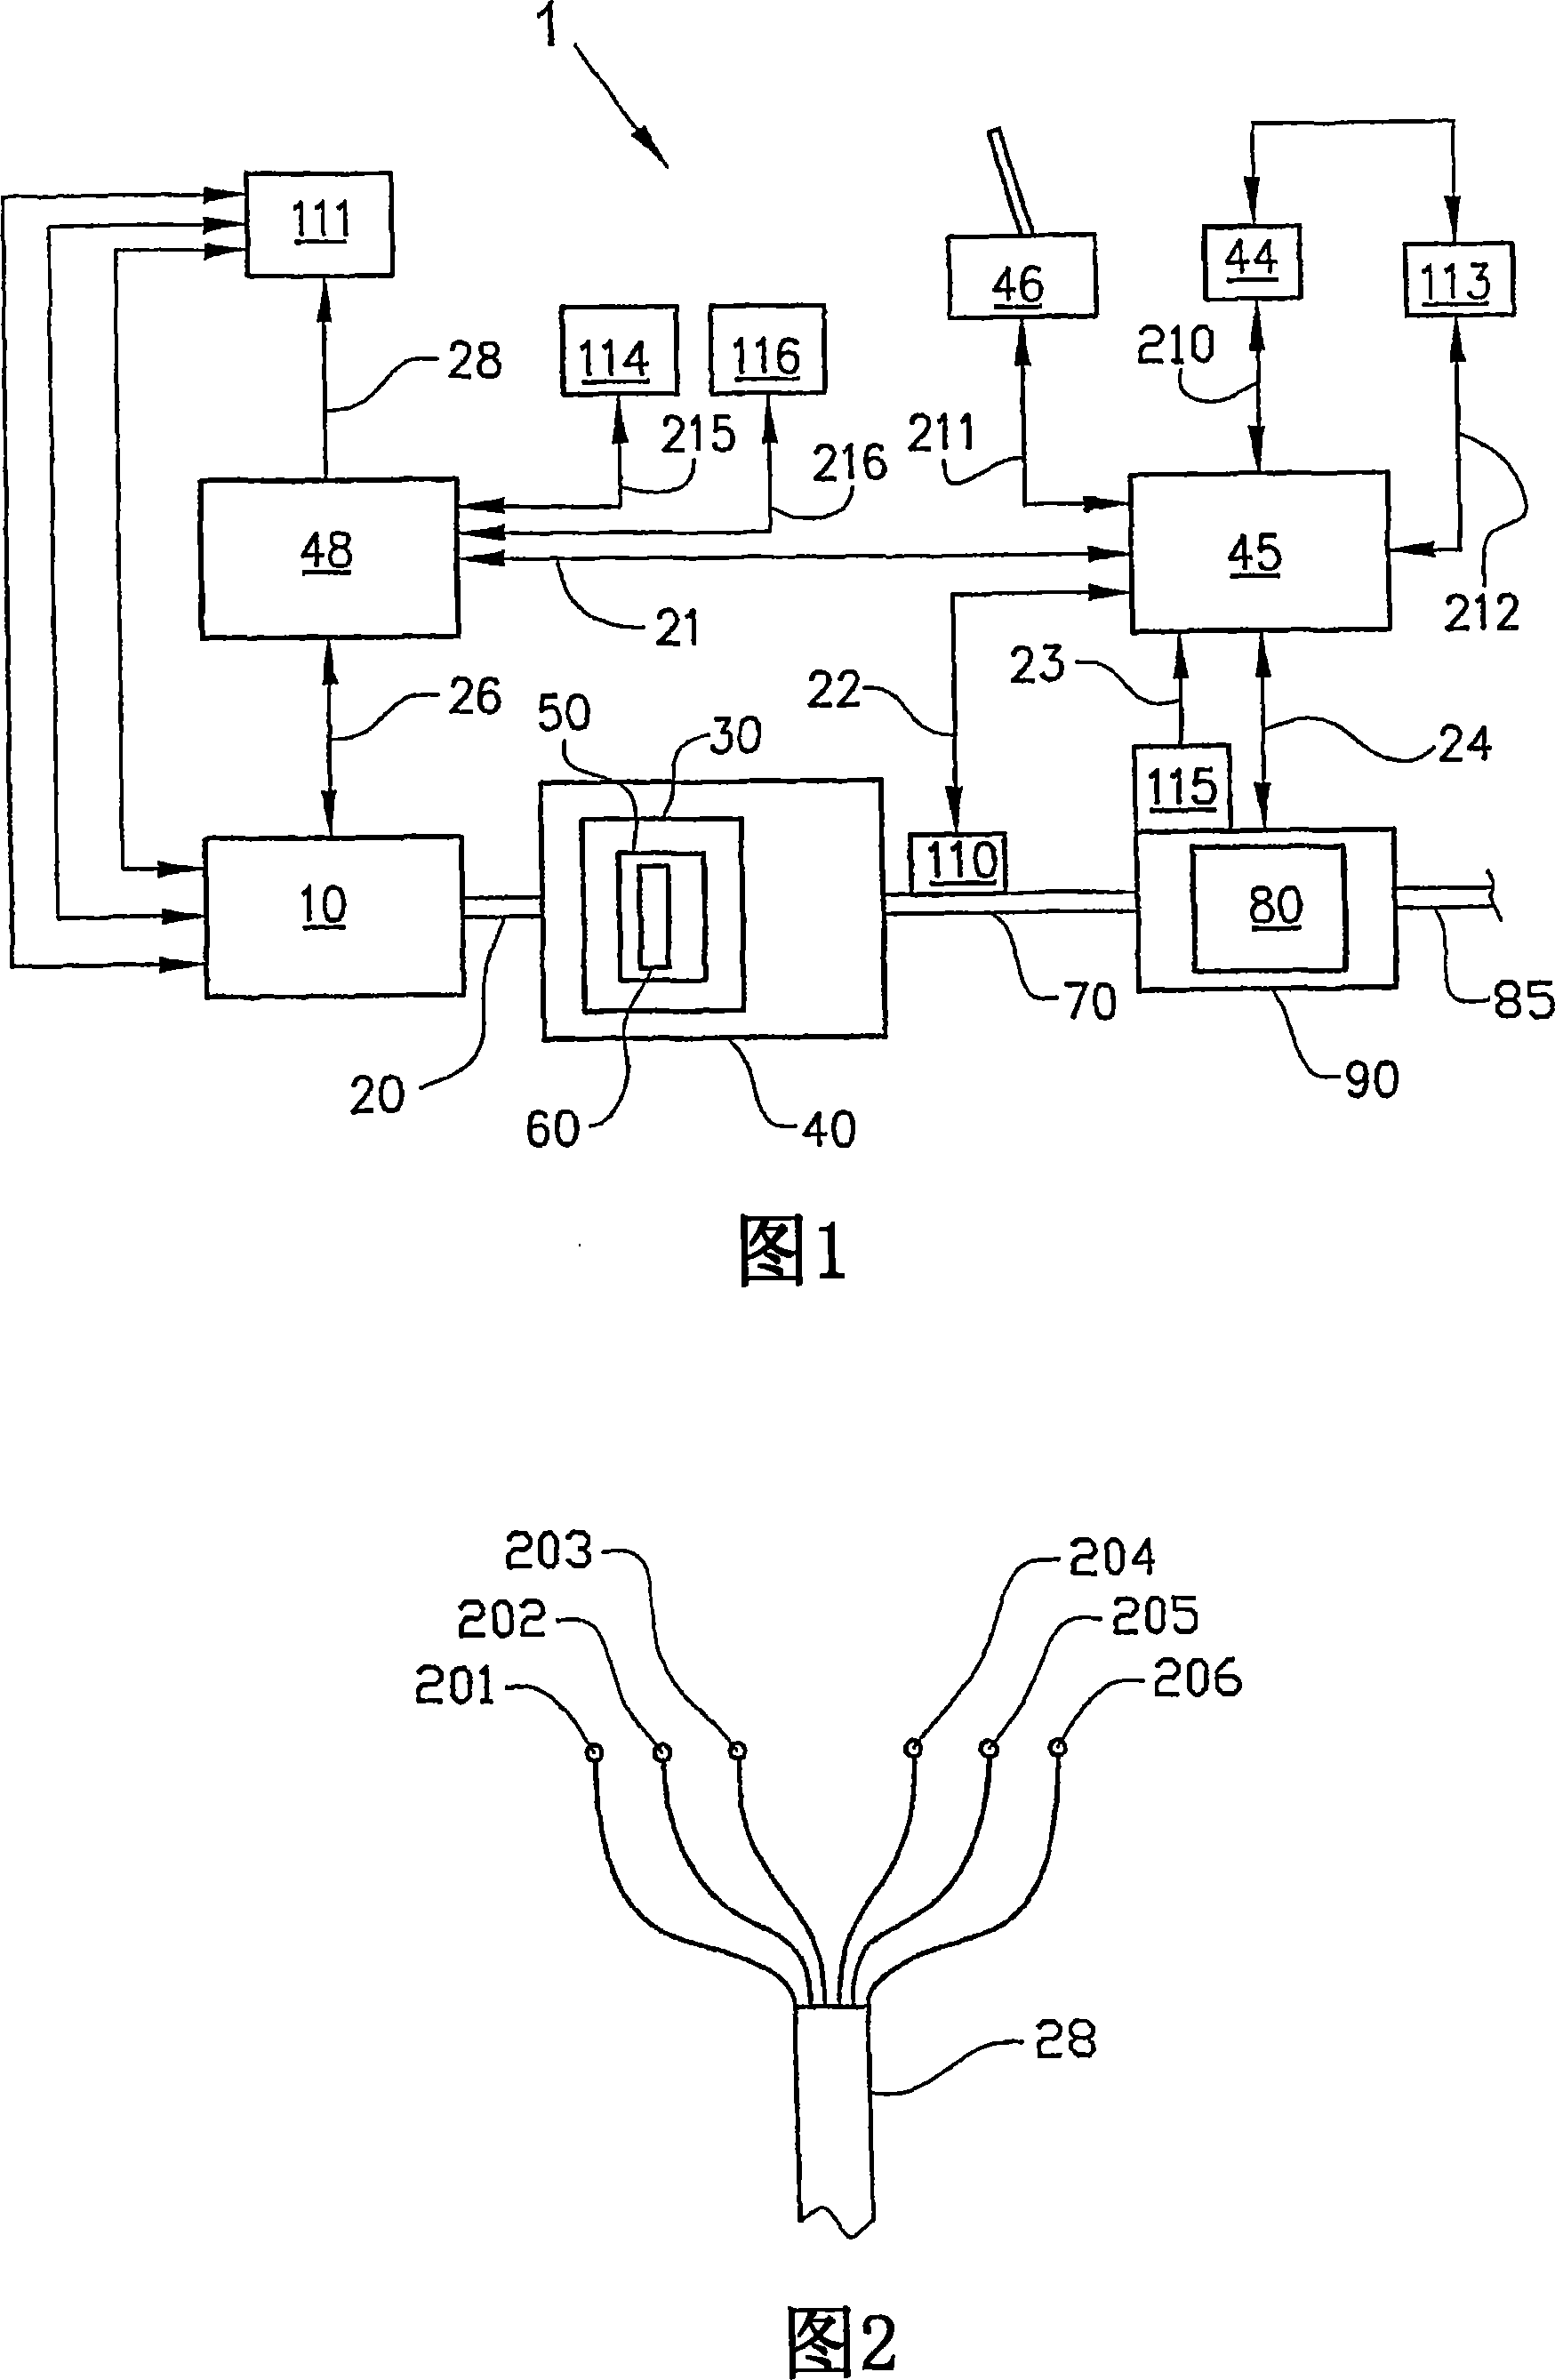 Engine-driven vehicle with transmission